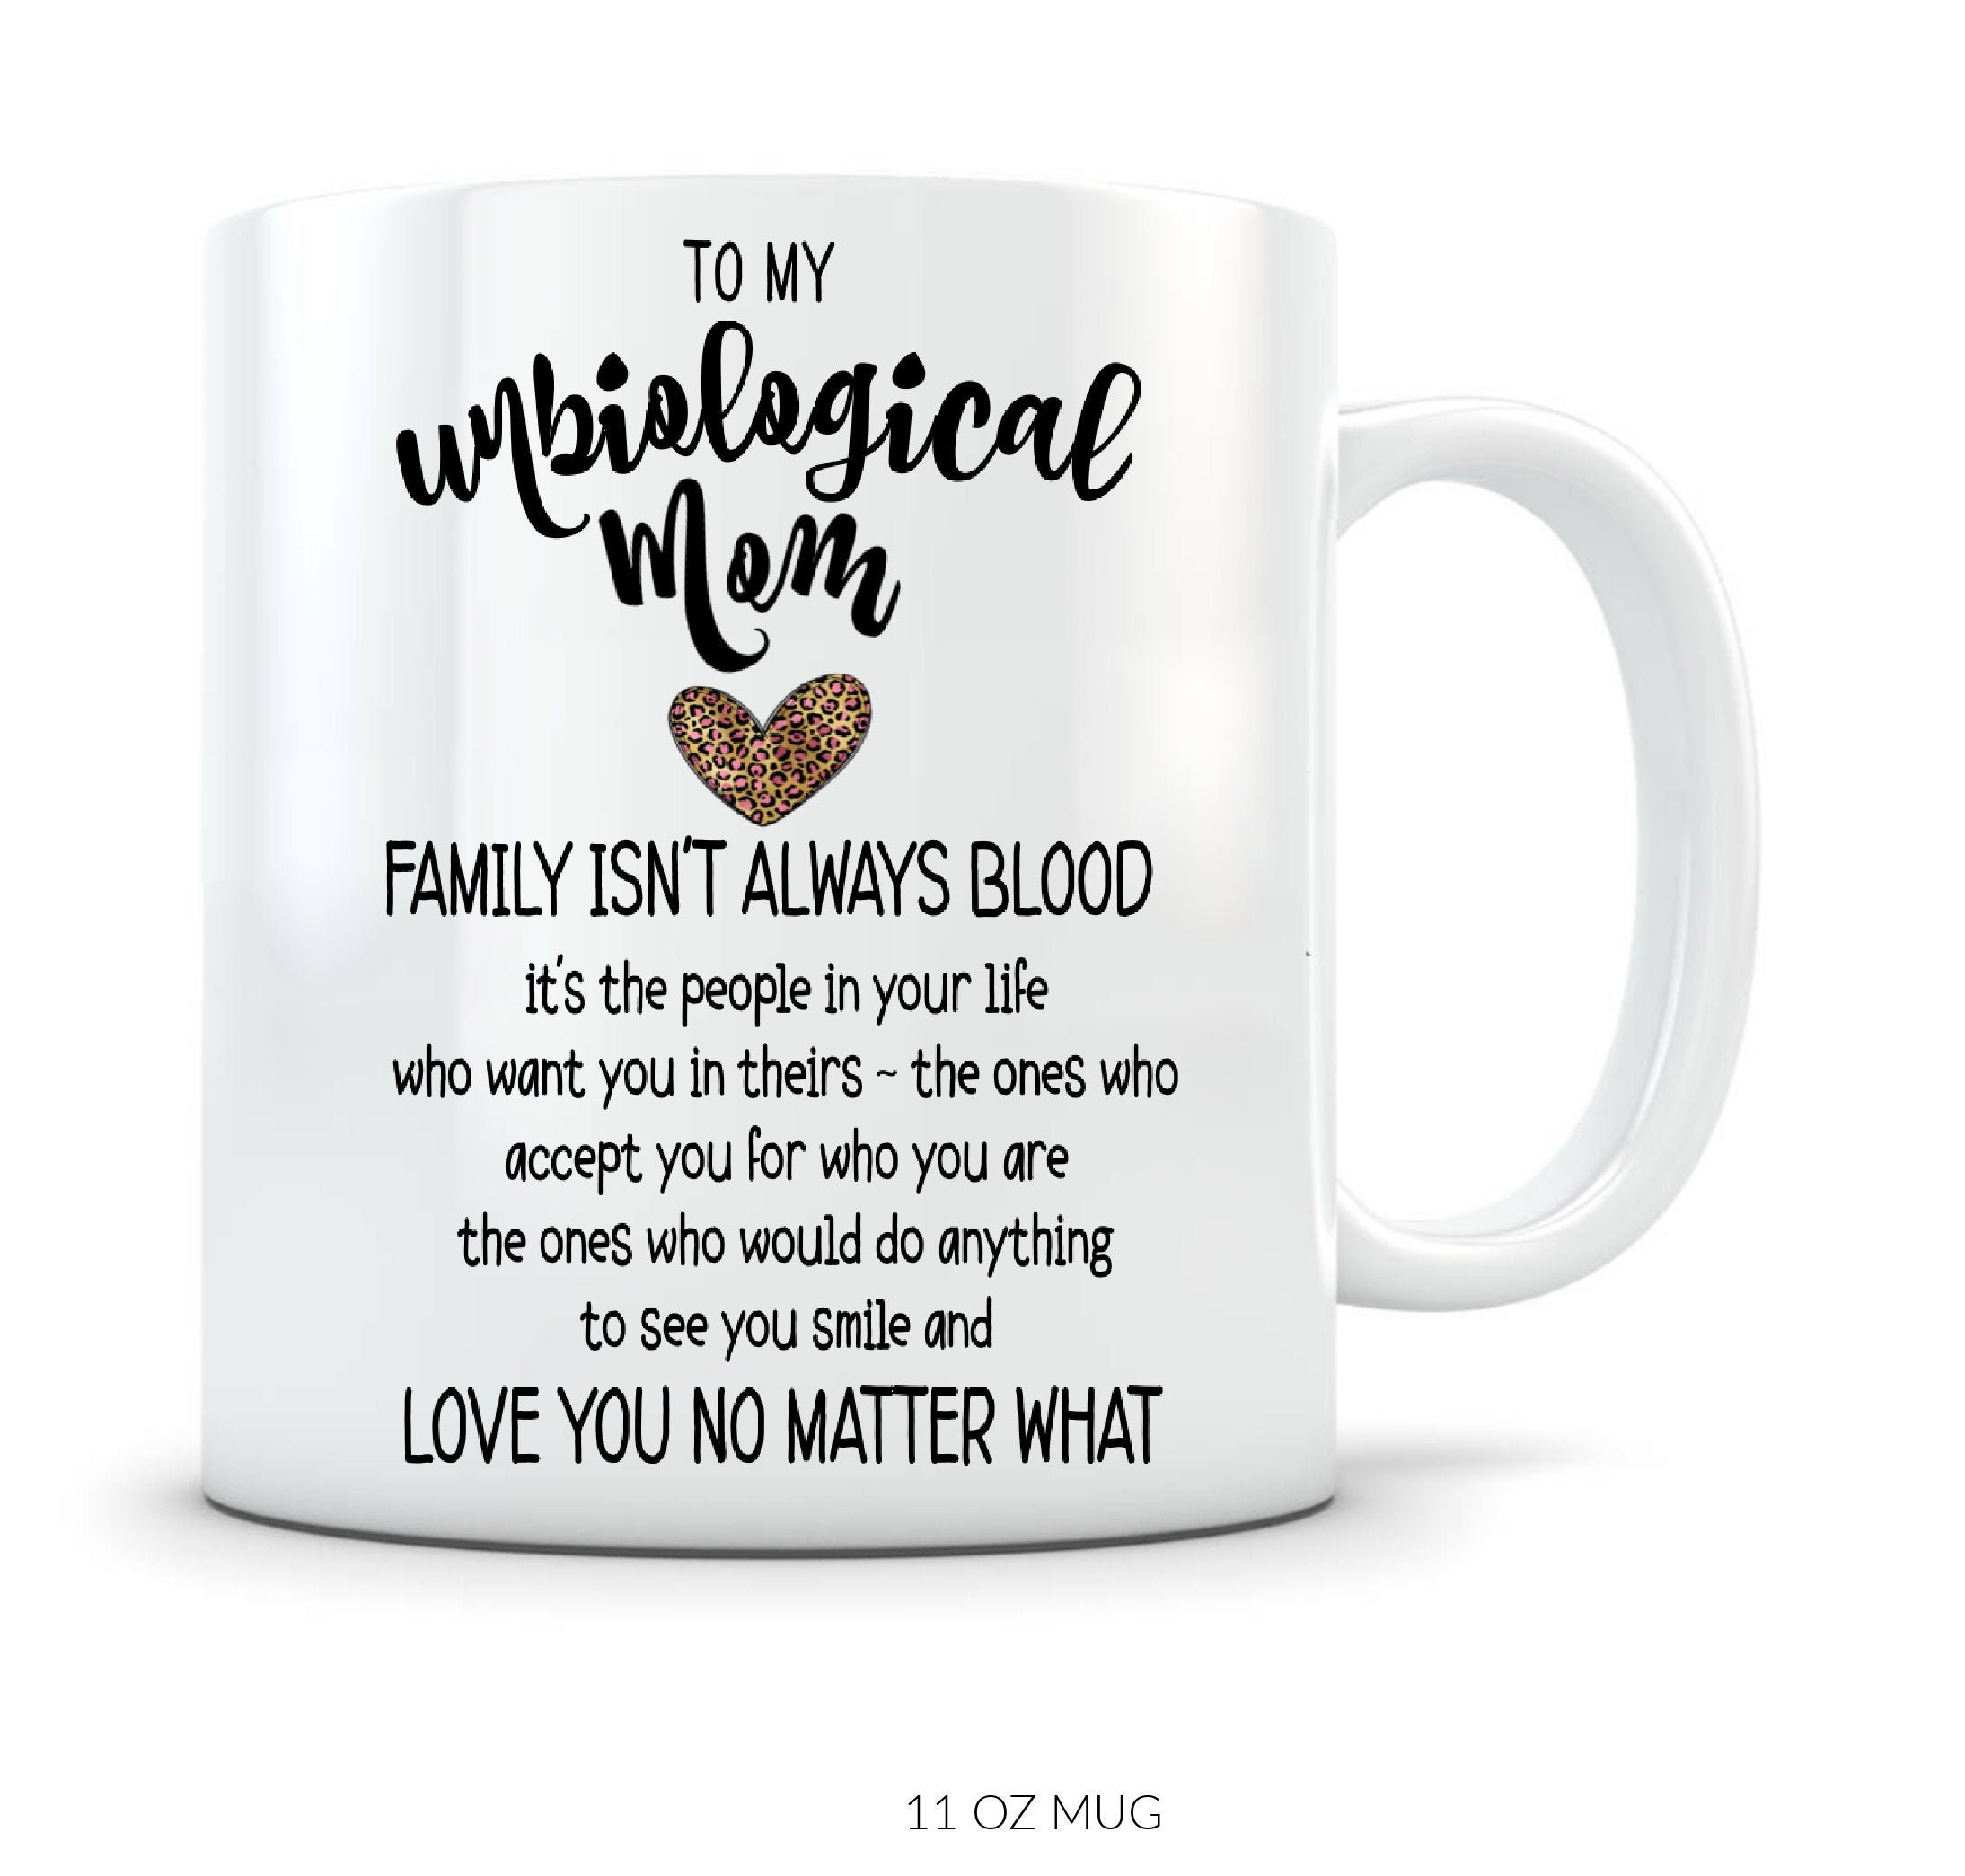 Best Bonus Mom Tumbler, Bonus Mom Gifts from Daughter Son, Step Mom Travel  Mug Cup, Mother in Law Tumbler, Christmas Gift, Mothers Day Gifts for Mother  in Law, Aunt, Stepmom, Bonus Mom